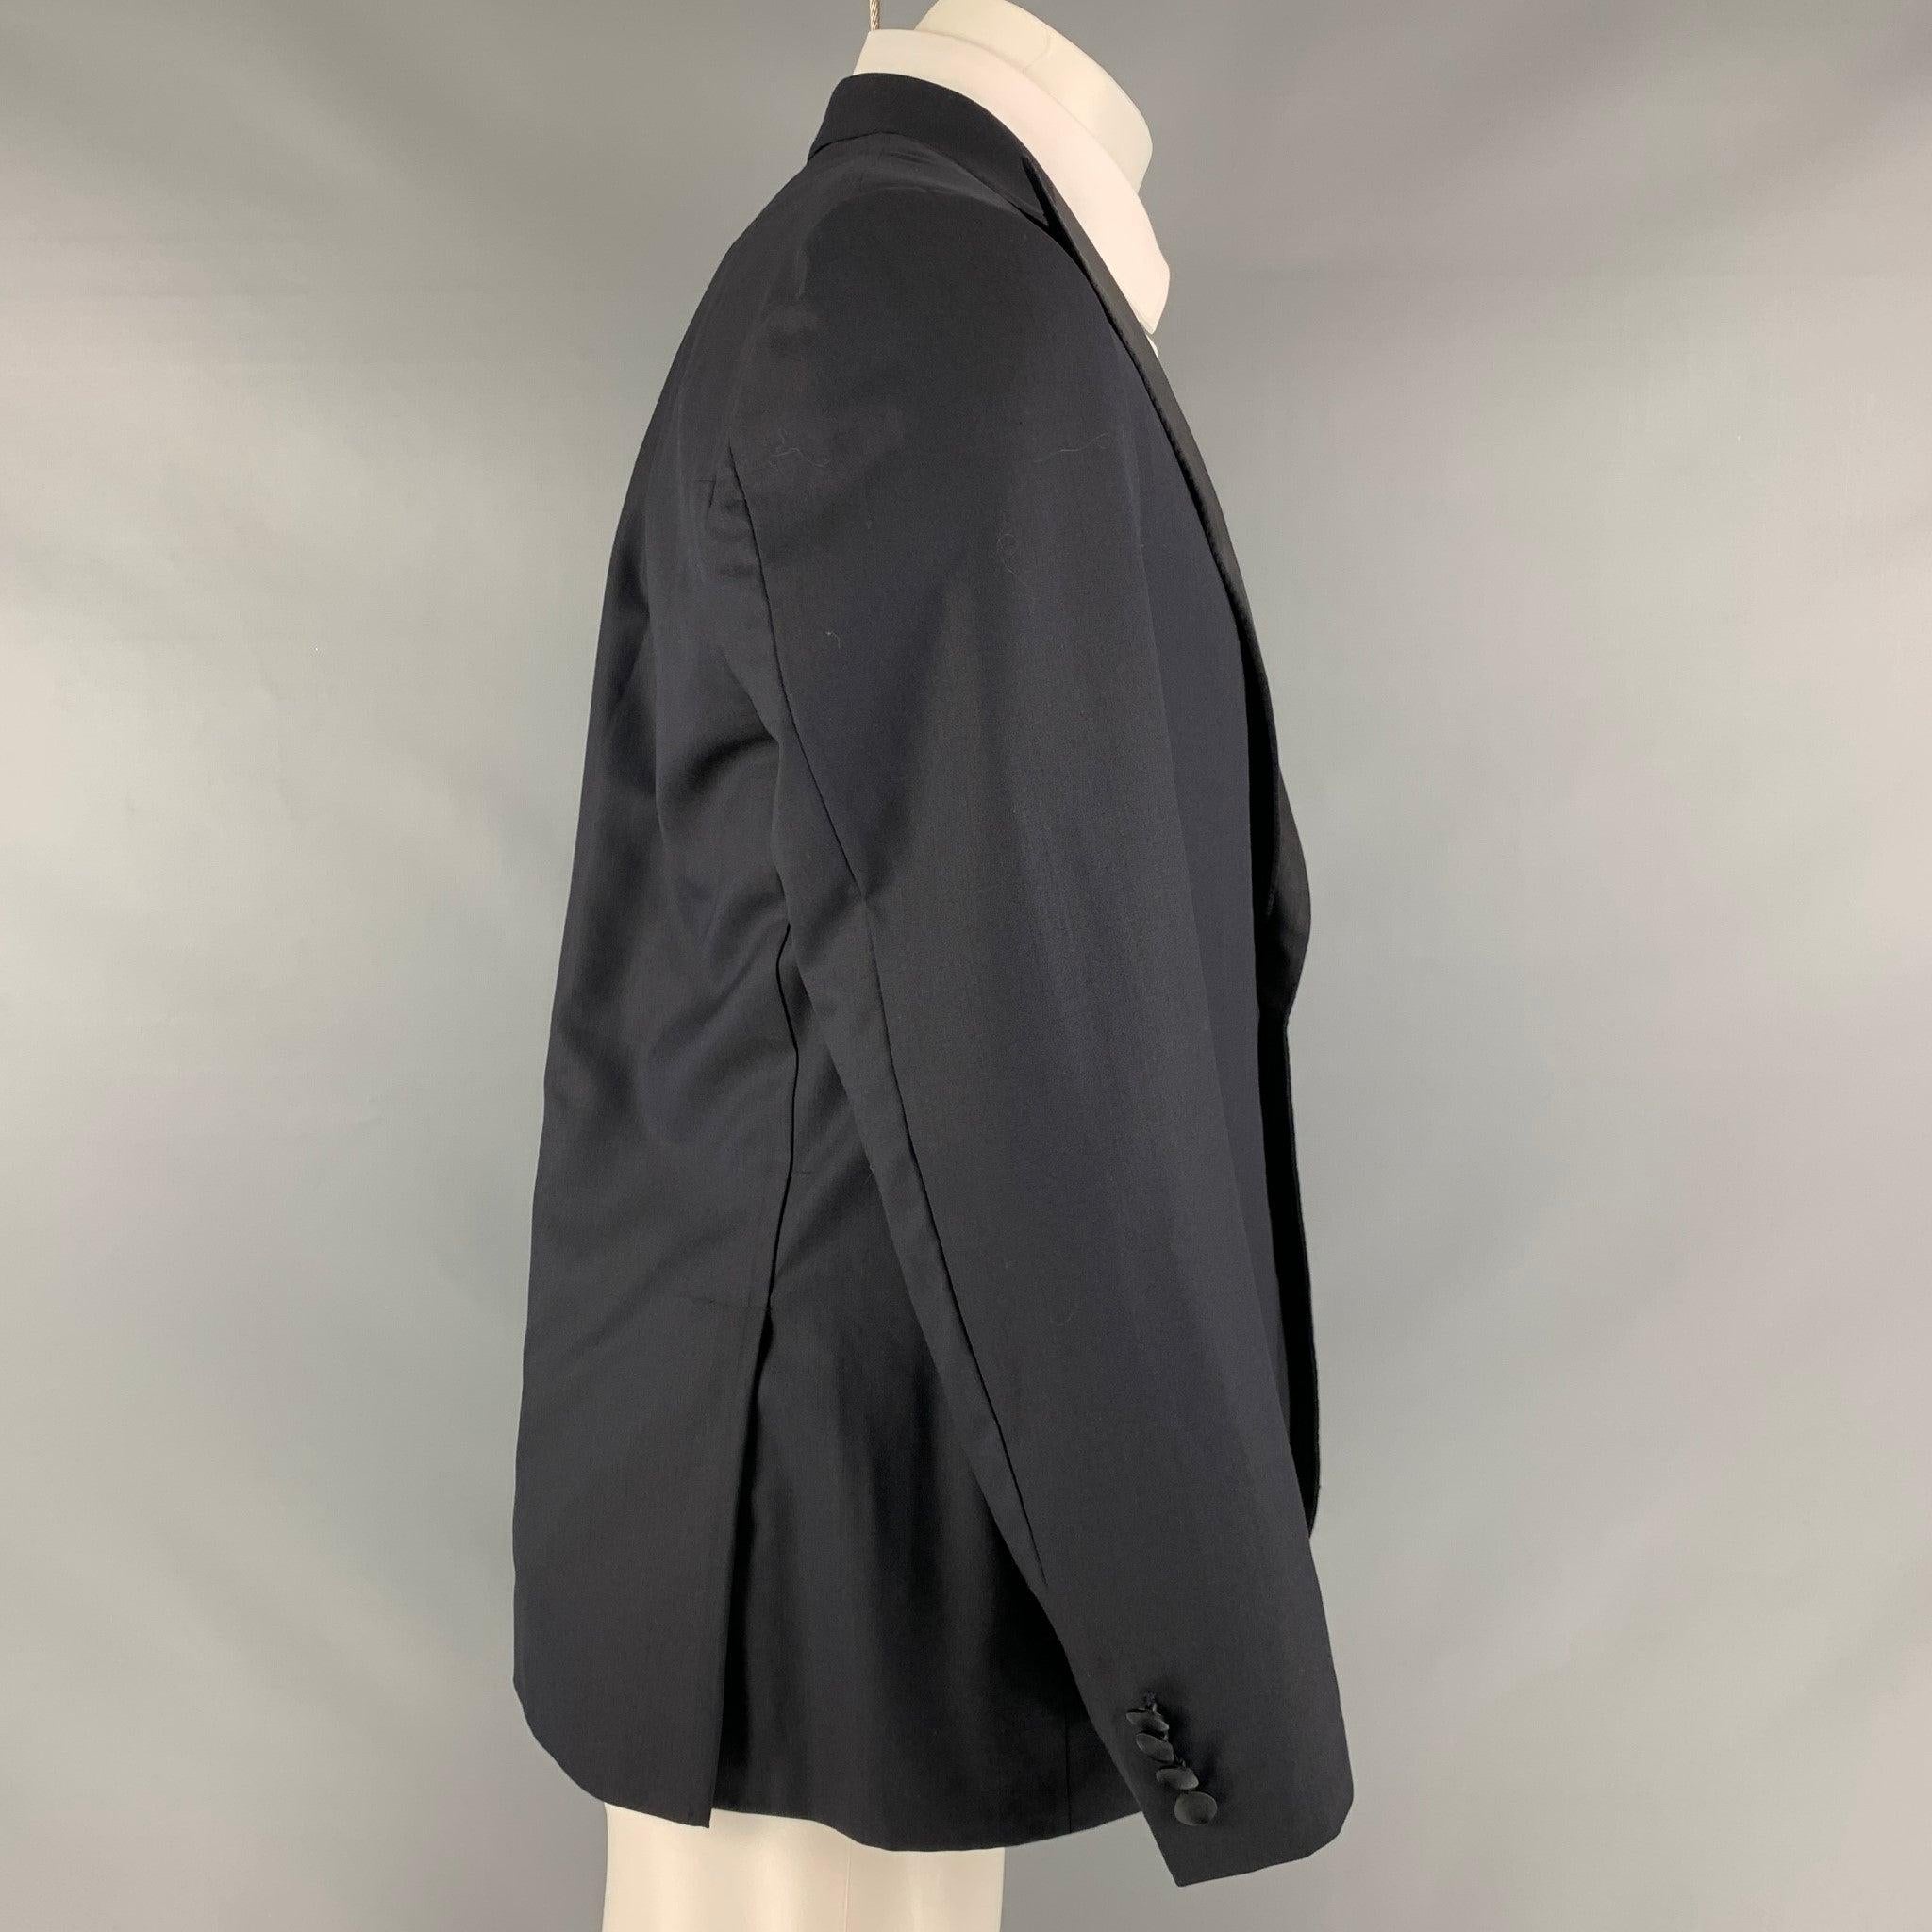 BRIONI sport coat comes in a black and navy wool woven material featuring a peak lapel, welt pockets, double back vent, and a single button closure. Made in Italy.Excellent Pre-Owned Condition. 

Marked:   40 

Measurements: 
 
Shoulder: 17.5 inches